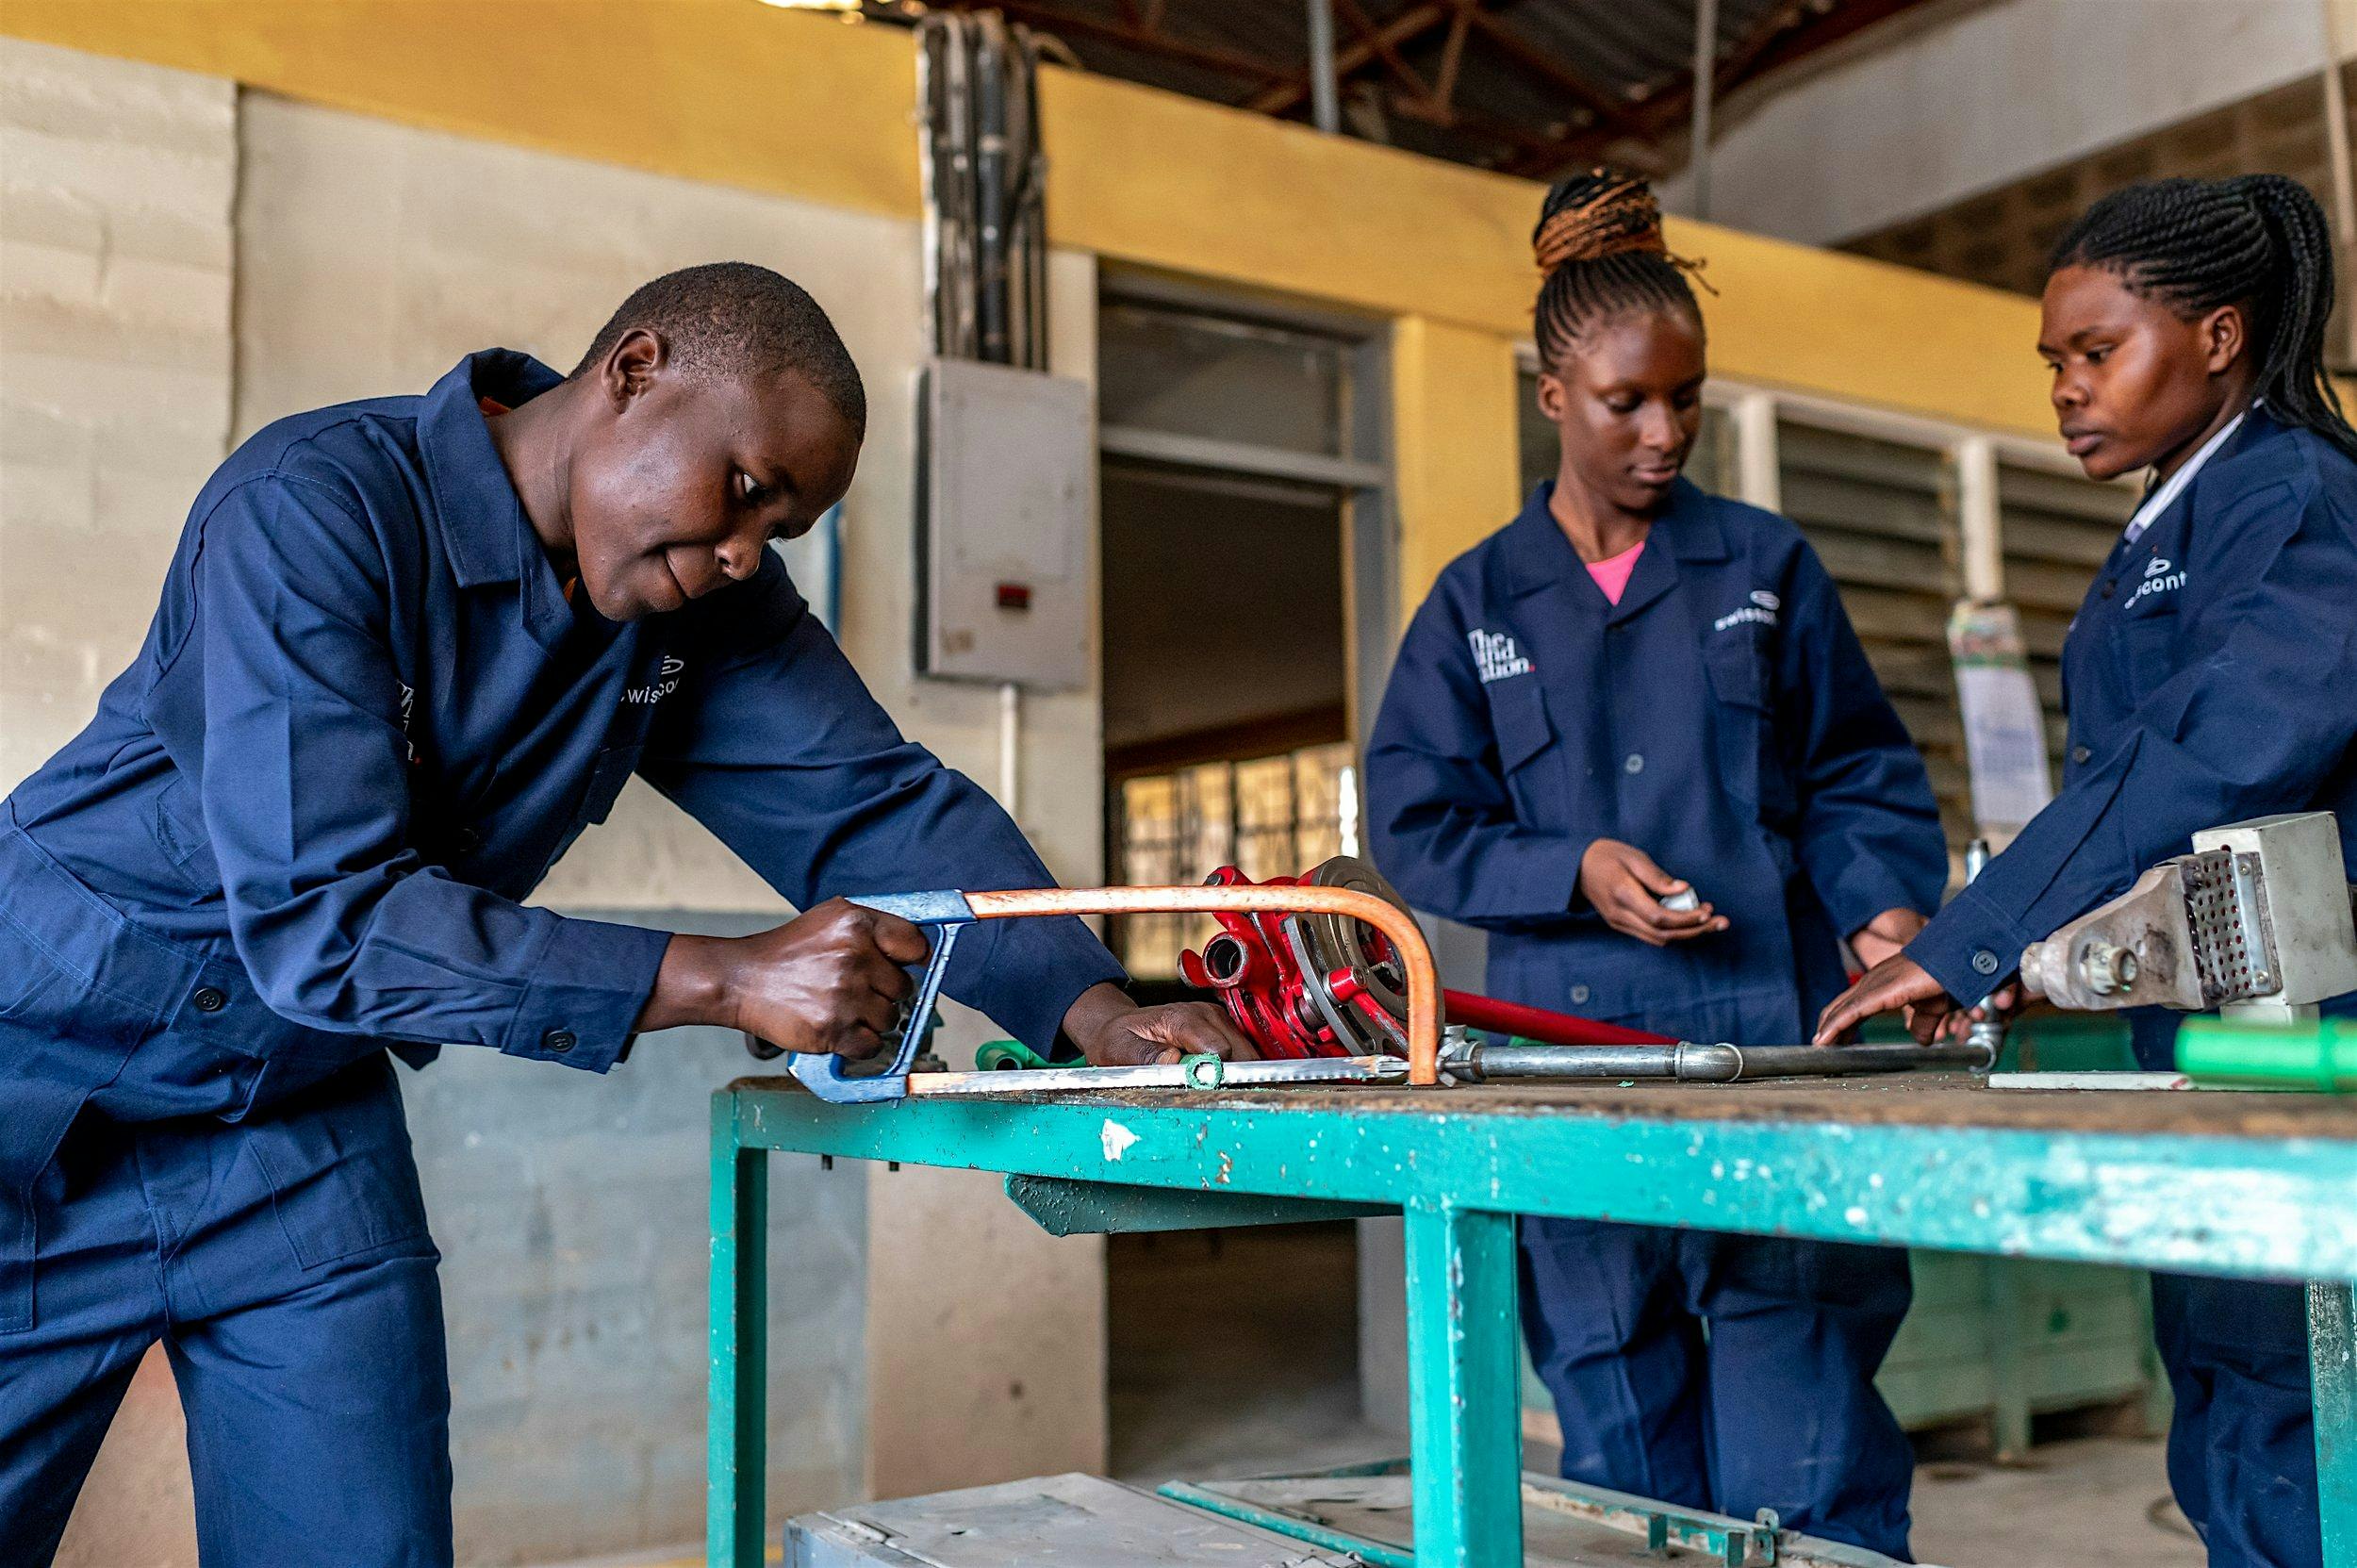 Raise funds to open vocational training classes for unemployed youth